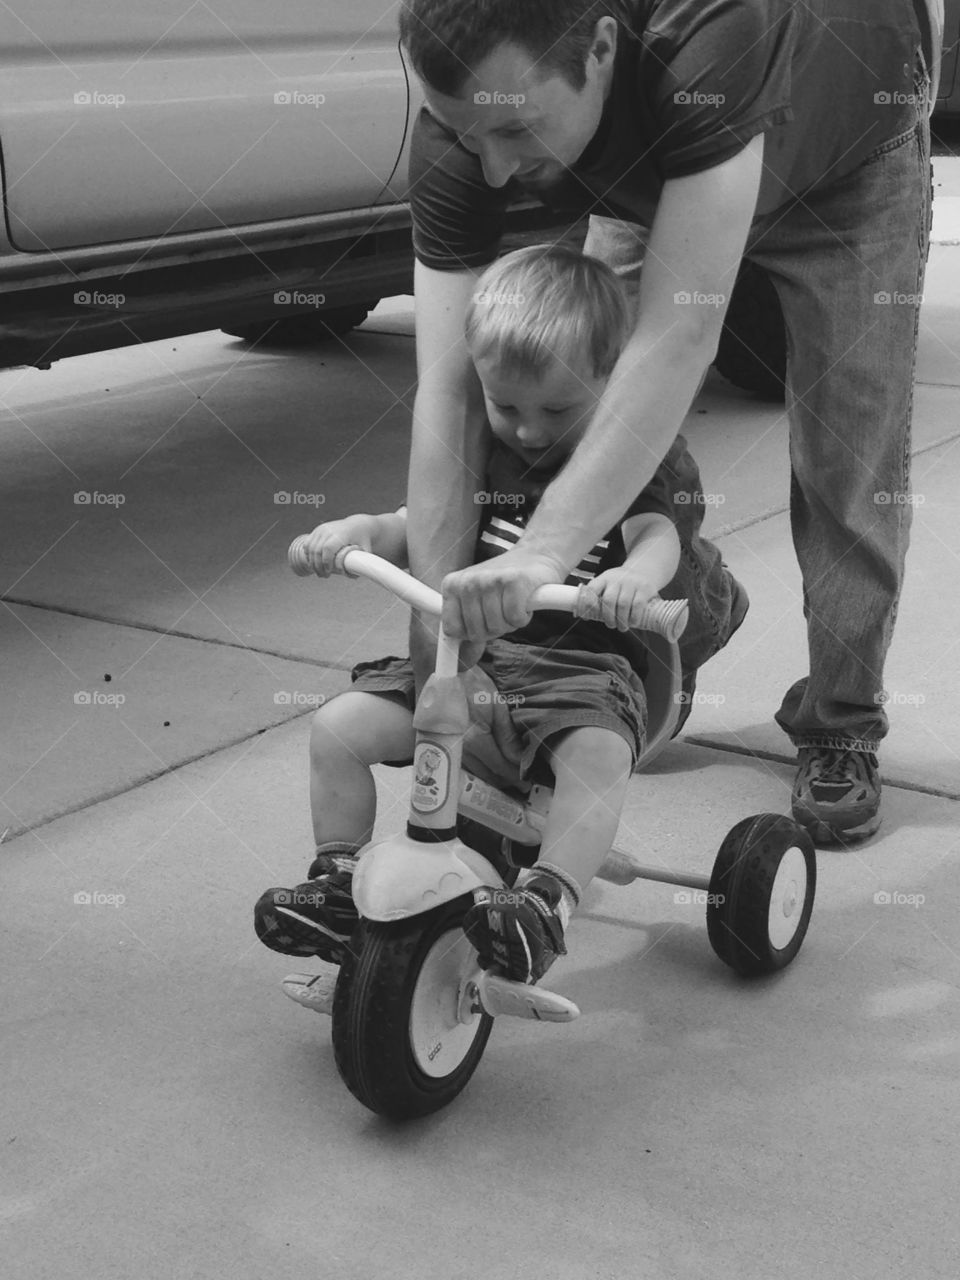 Learning to ride a bike with Dad